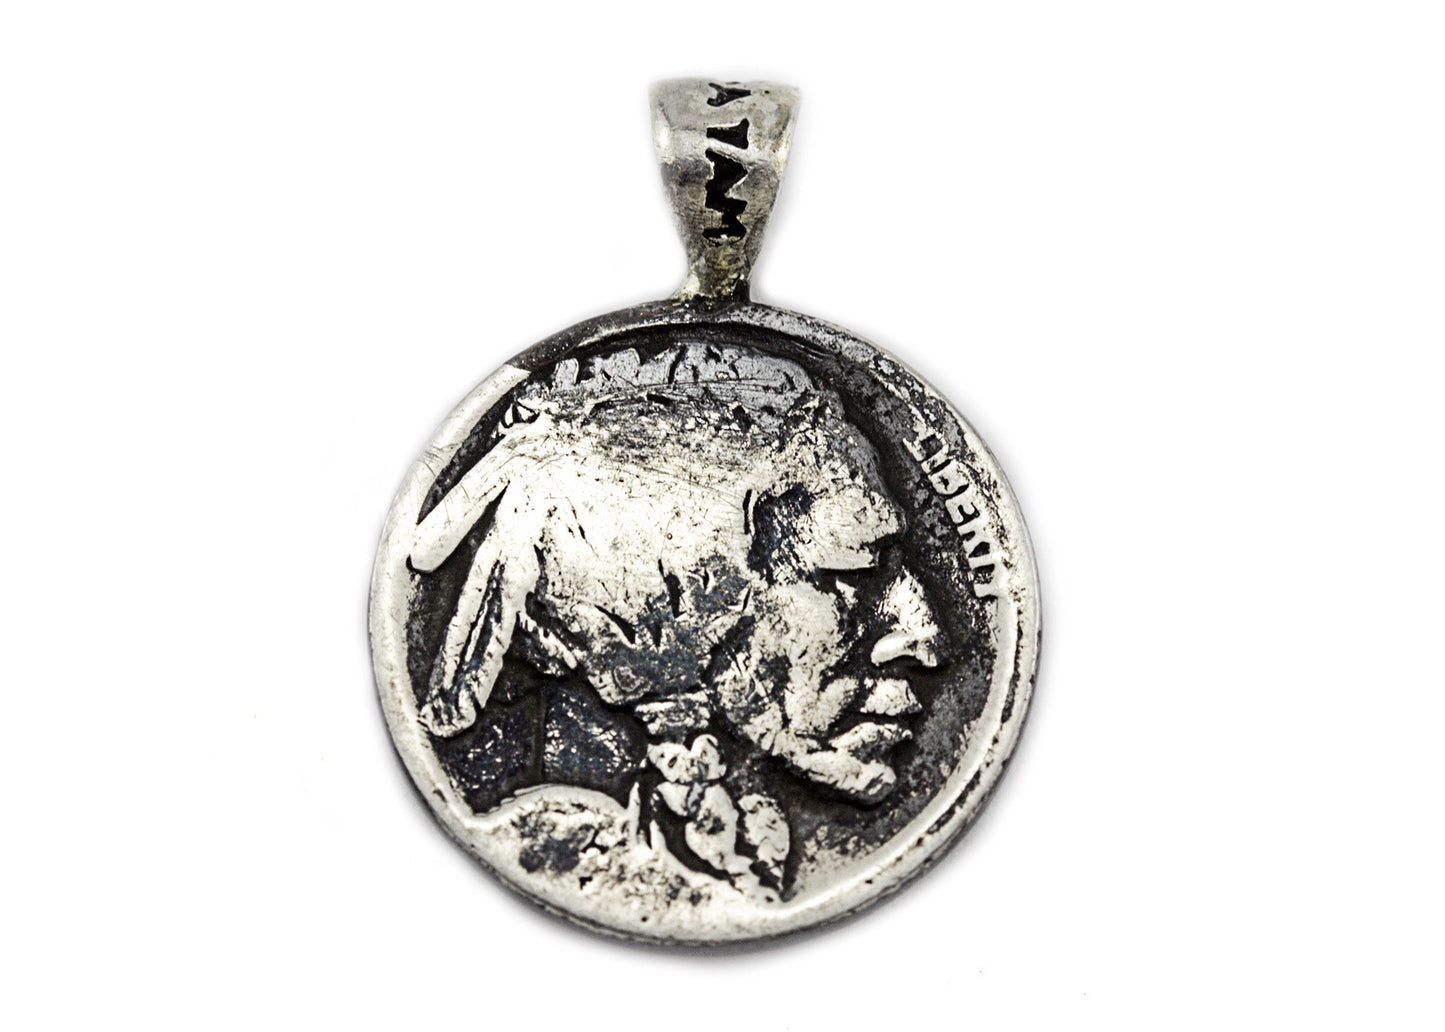 Om coin medallion and the Buffalo Nickel coin of USA